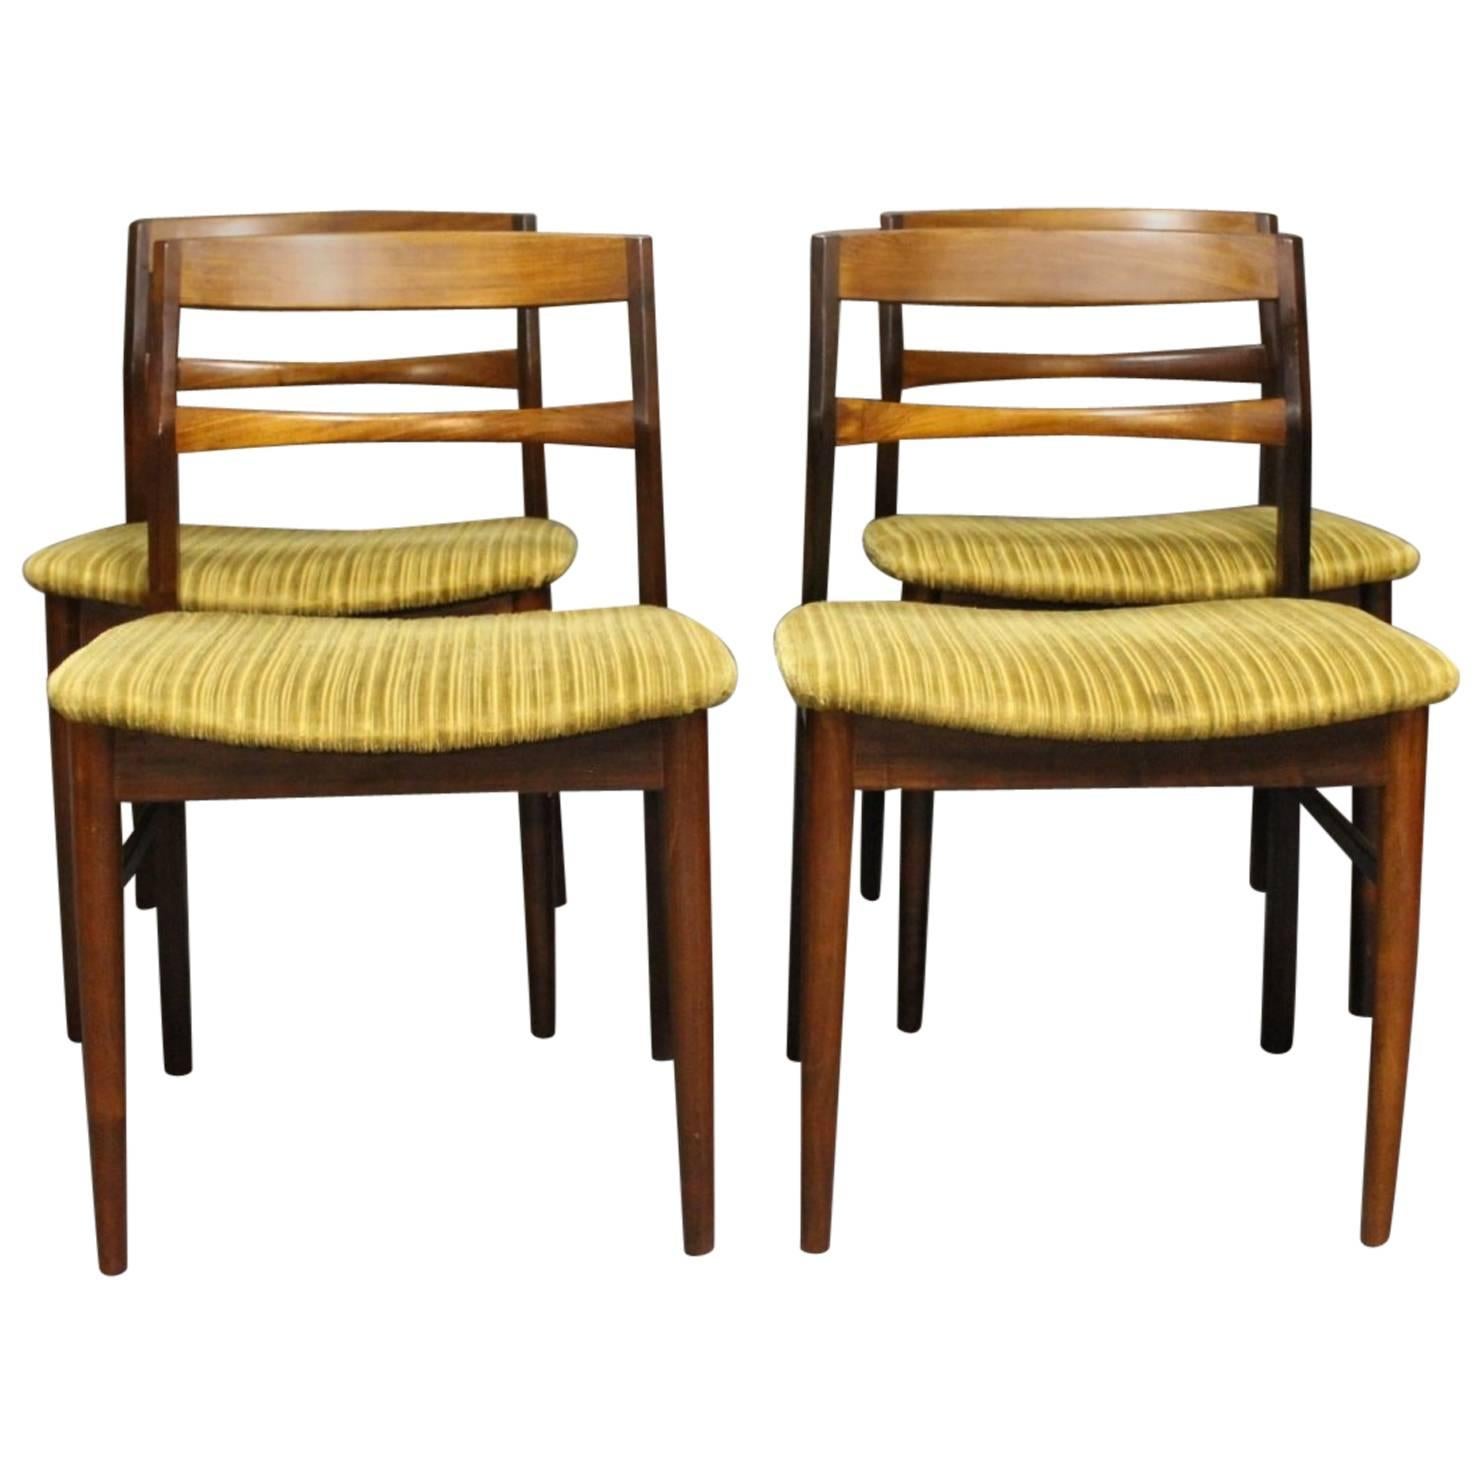 Set of Four Dining Room Chairs in Rosewood by Arne Vodder, 1960s For Sale